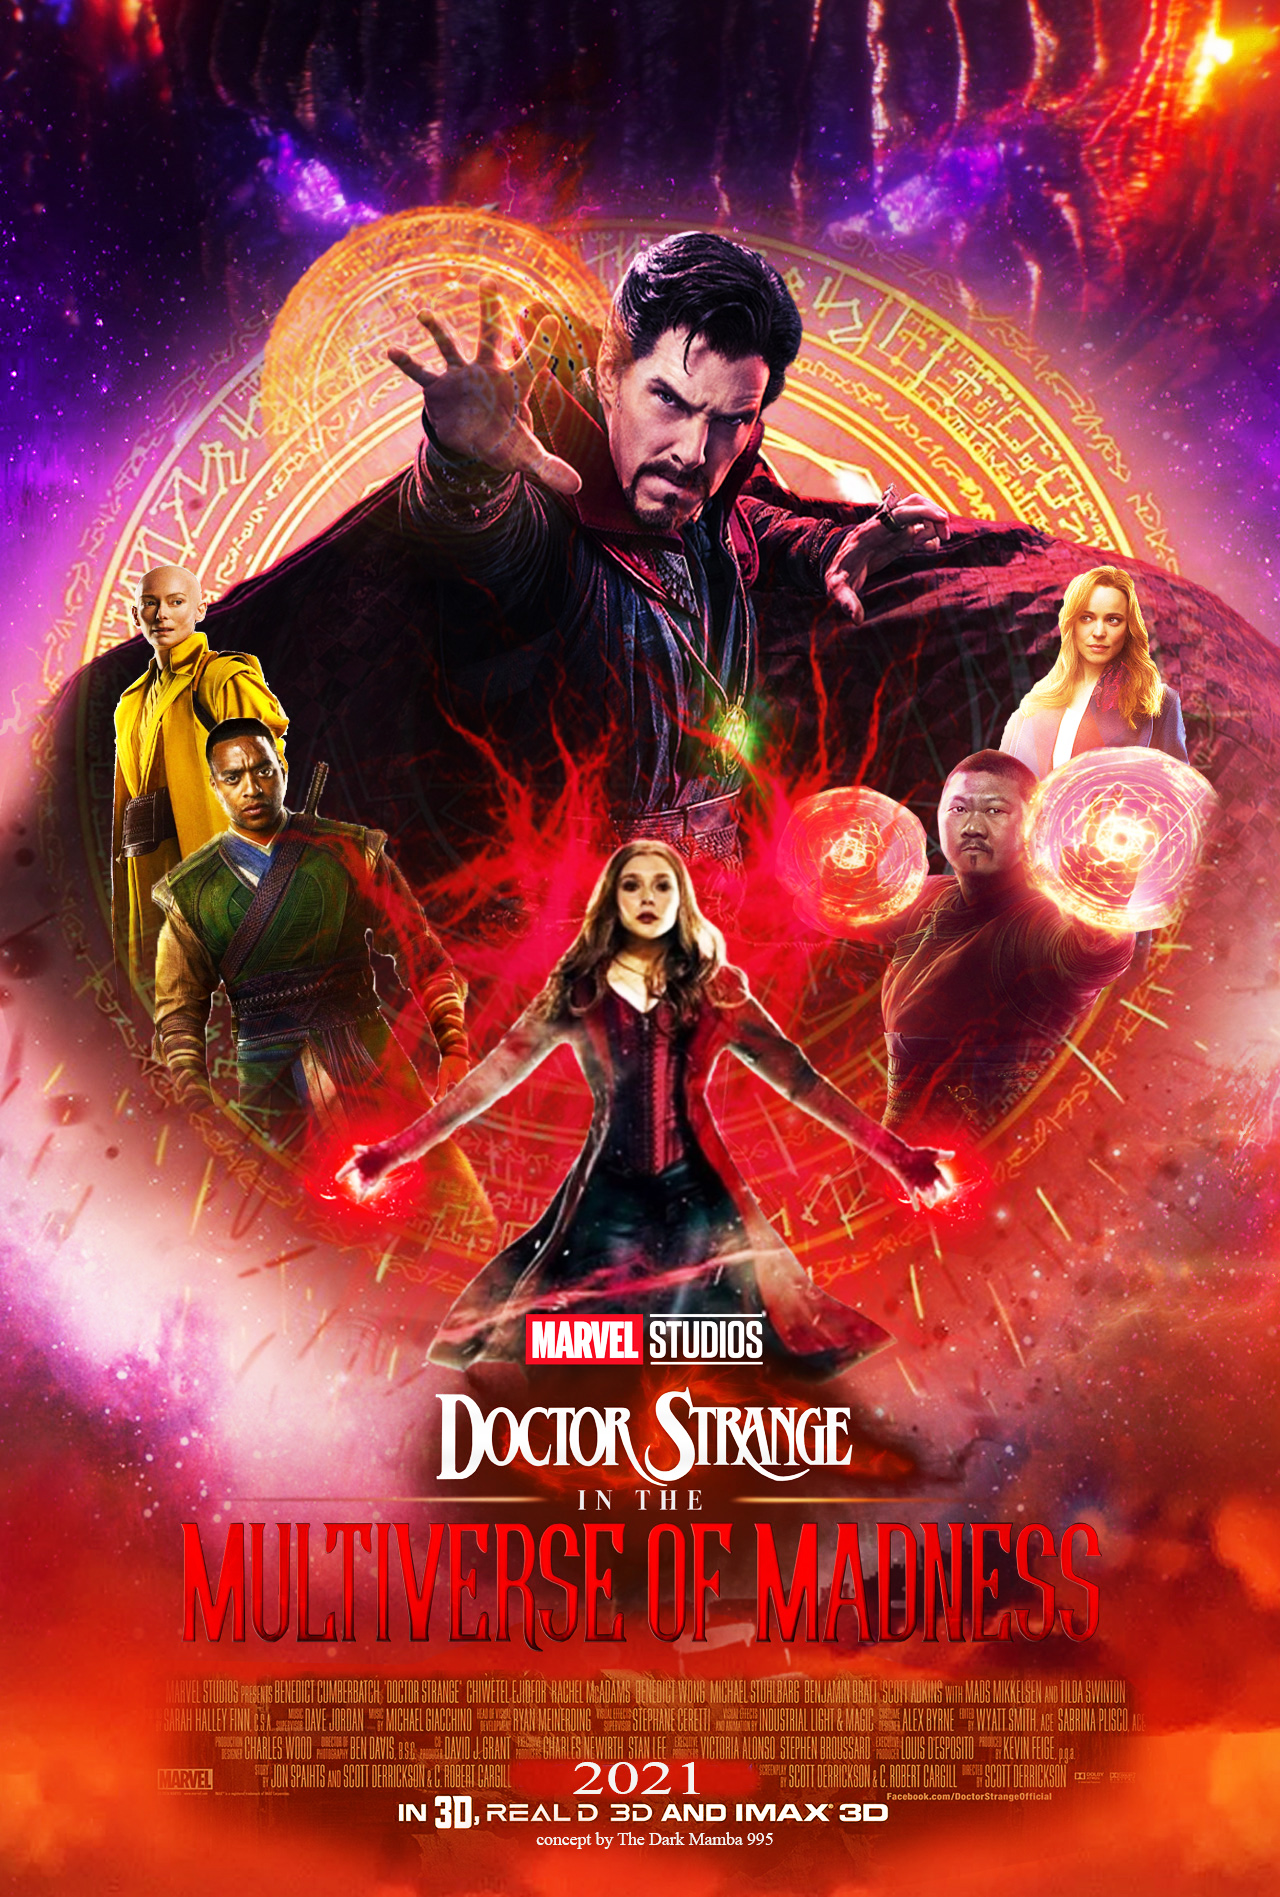 Doctor Strange in the Multiverse of Madness Poster by The-Dark-Mamba